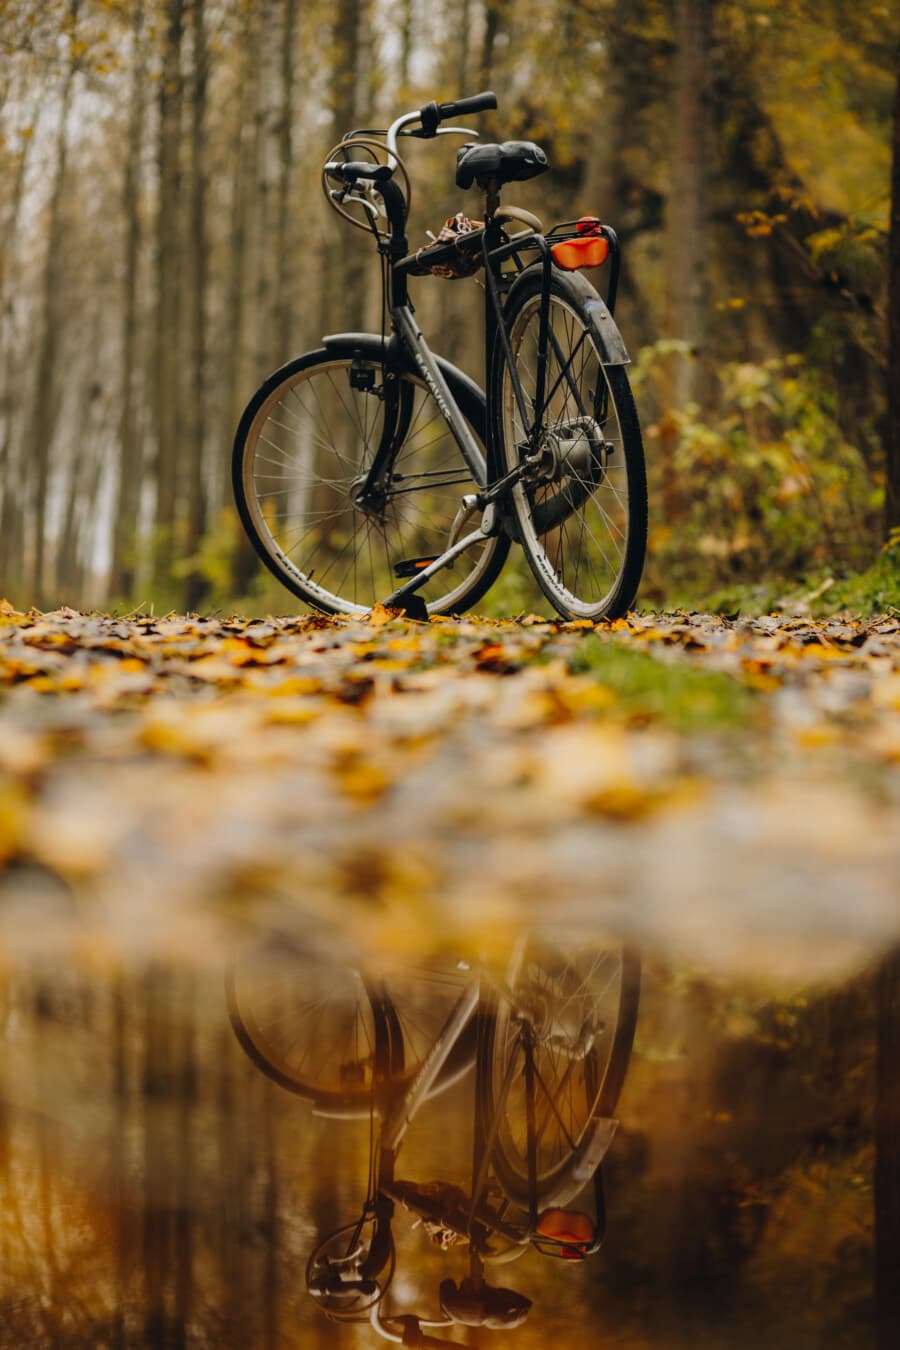 forest trail, autumn, bicycle, leaves, dry, ground, water, reflection, outdoors, leaf